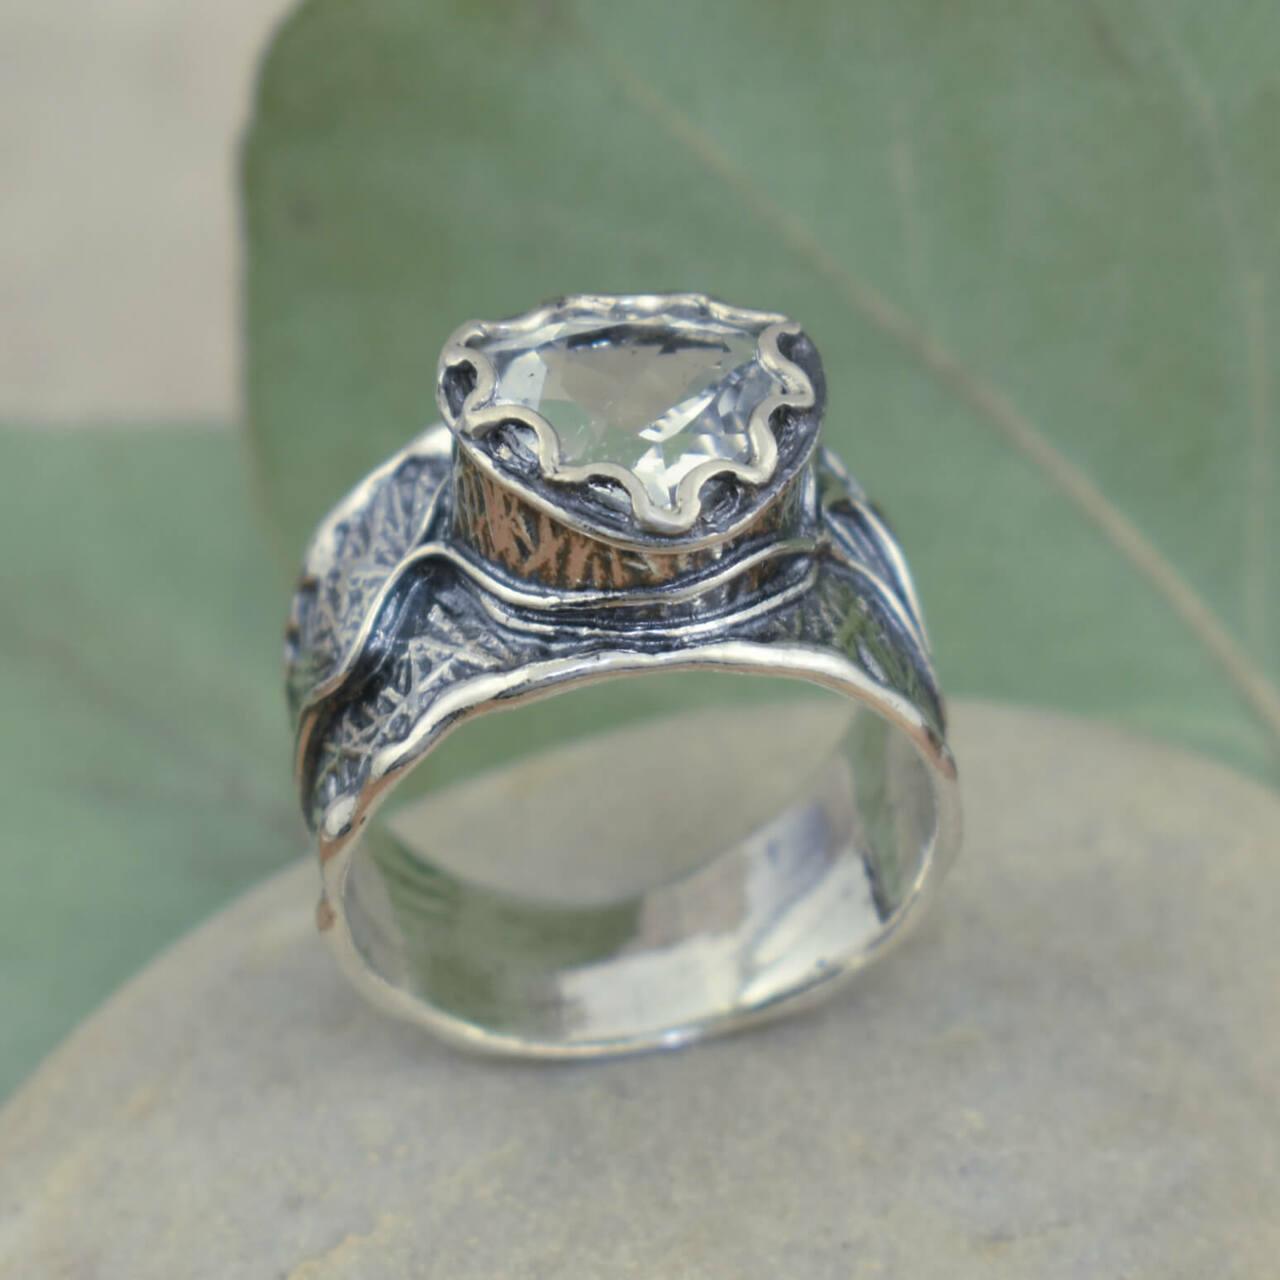 She's a Natural Ring in sterling silver and white topaz